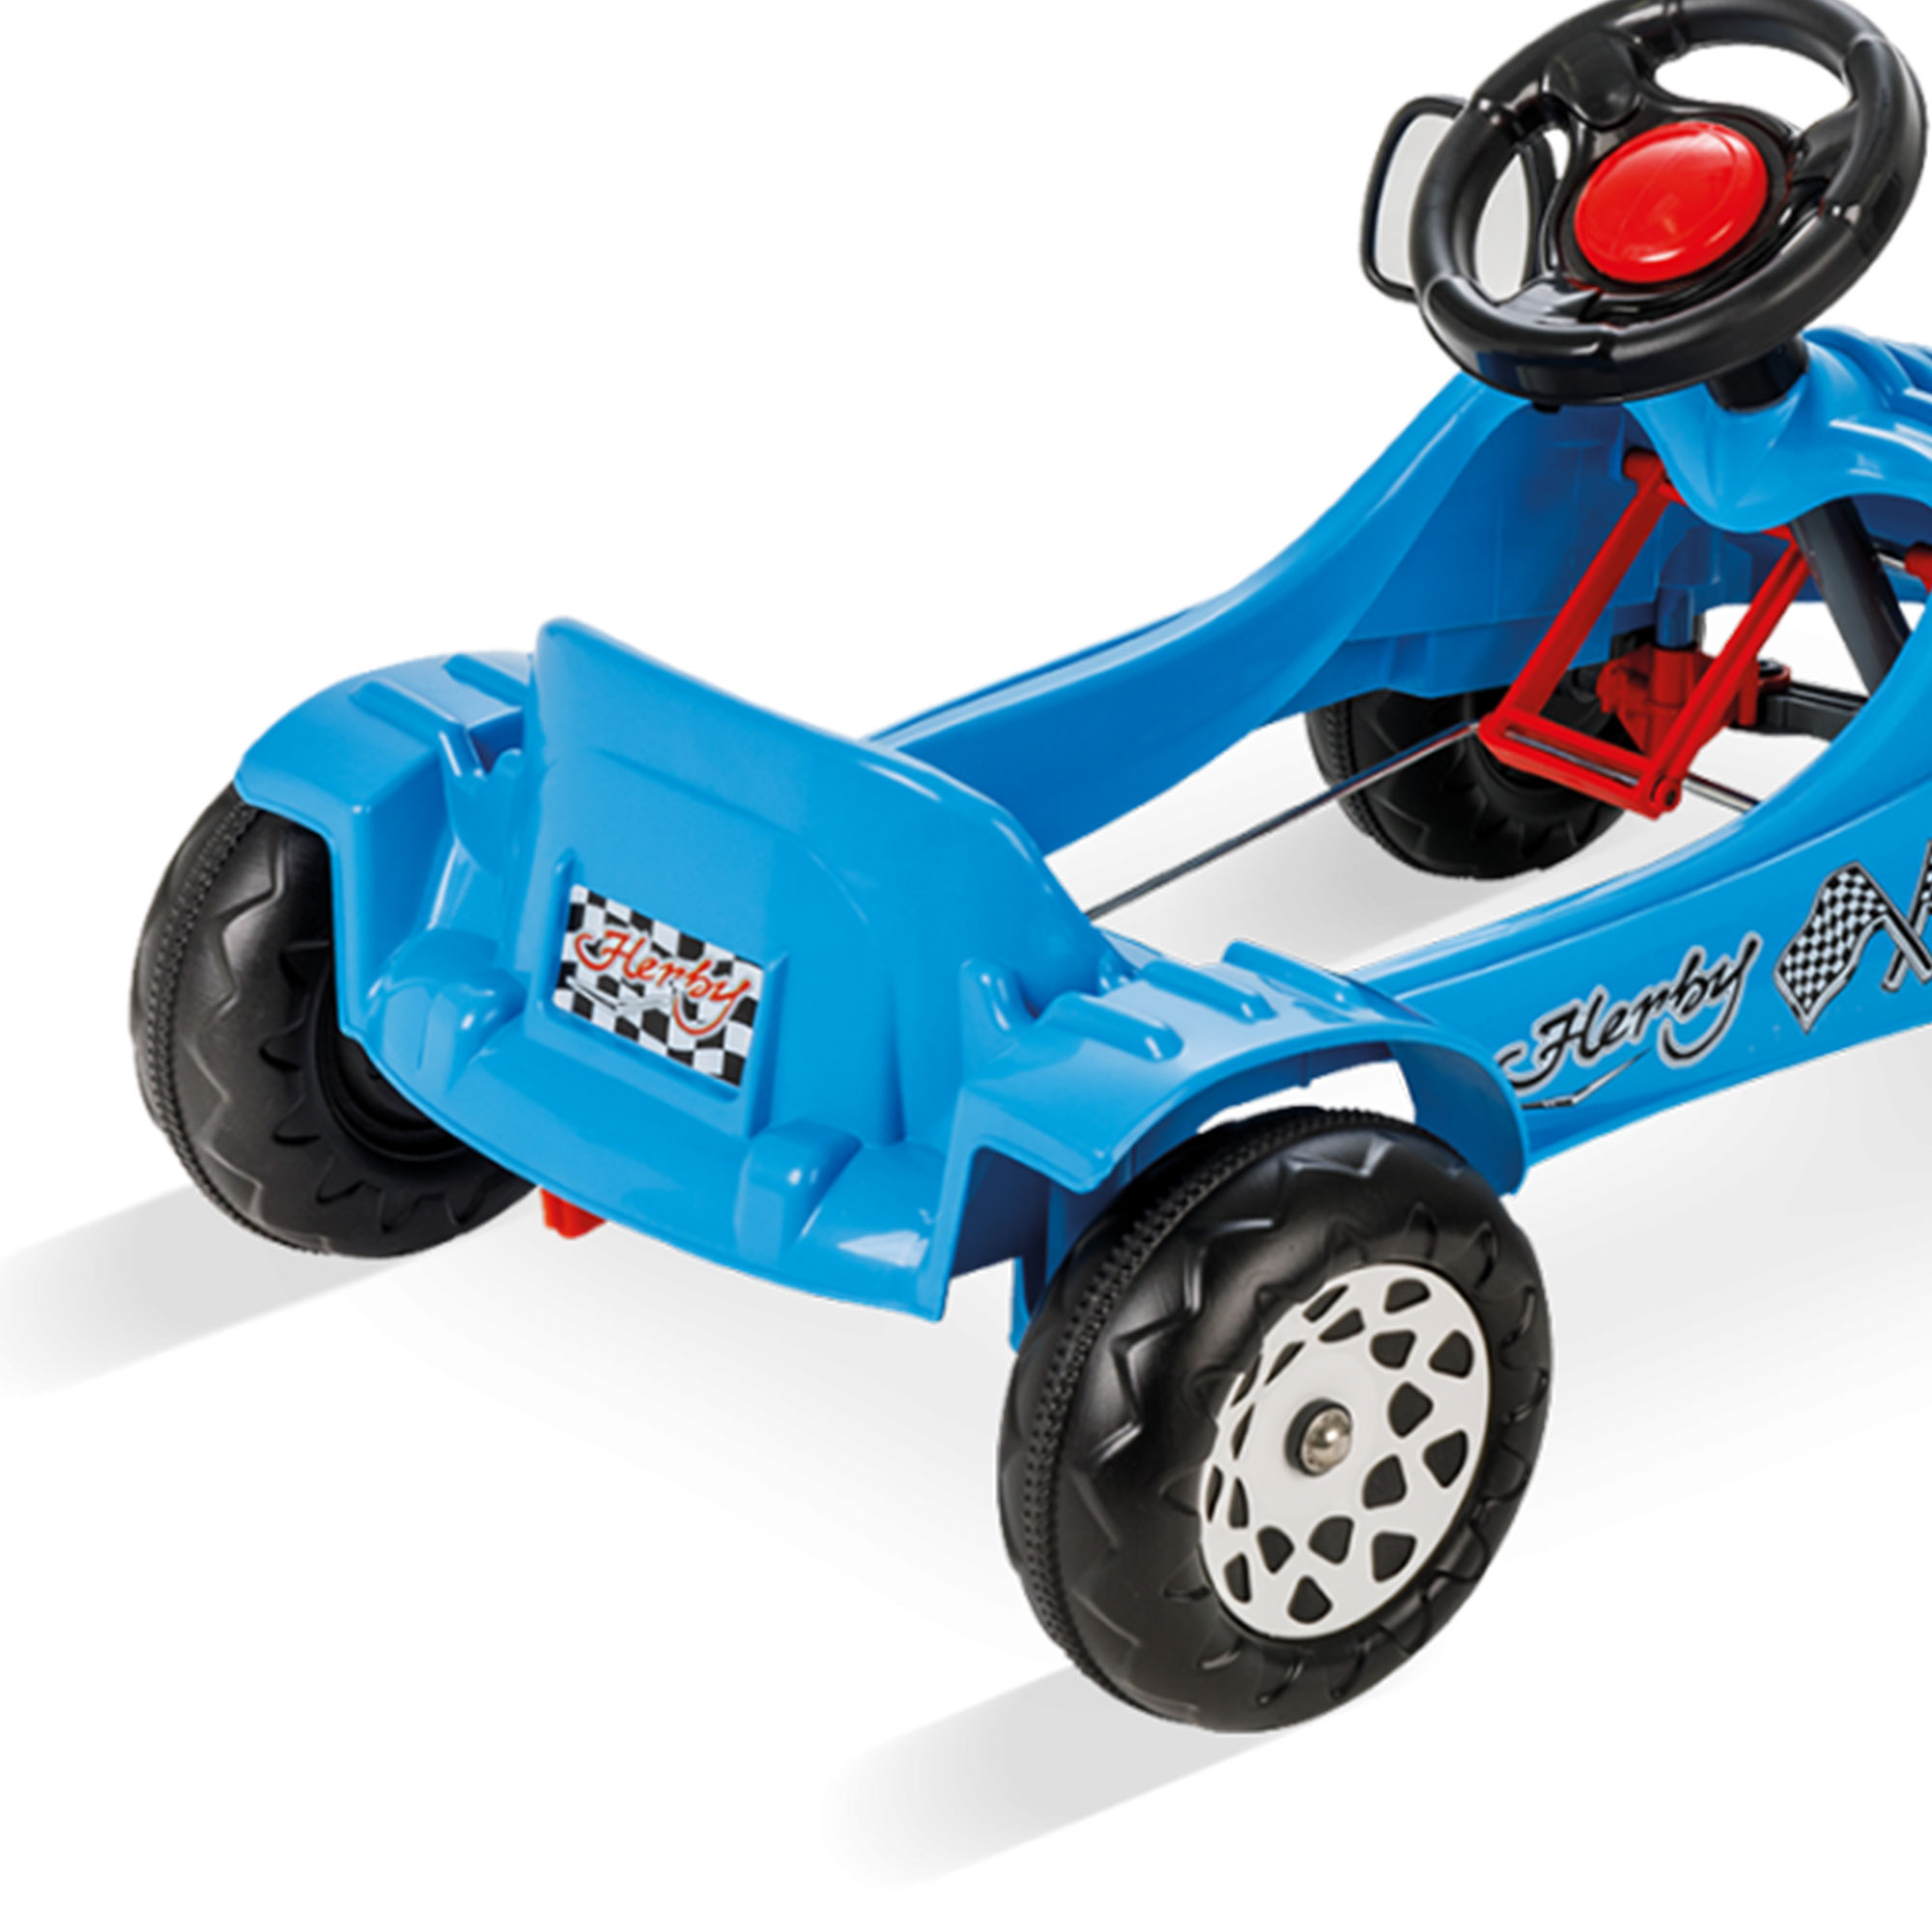 Pilsan Herby Pedal Car w/ Moving Mirrors and Horn for Ages 3 & Up, Blue - image 4 of 5